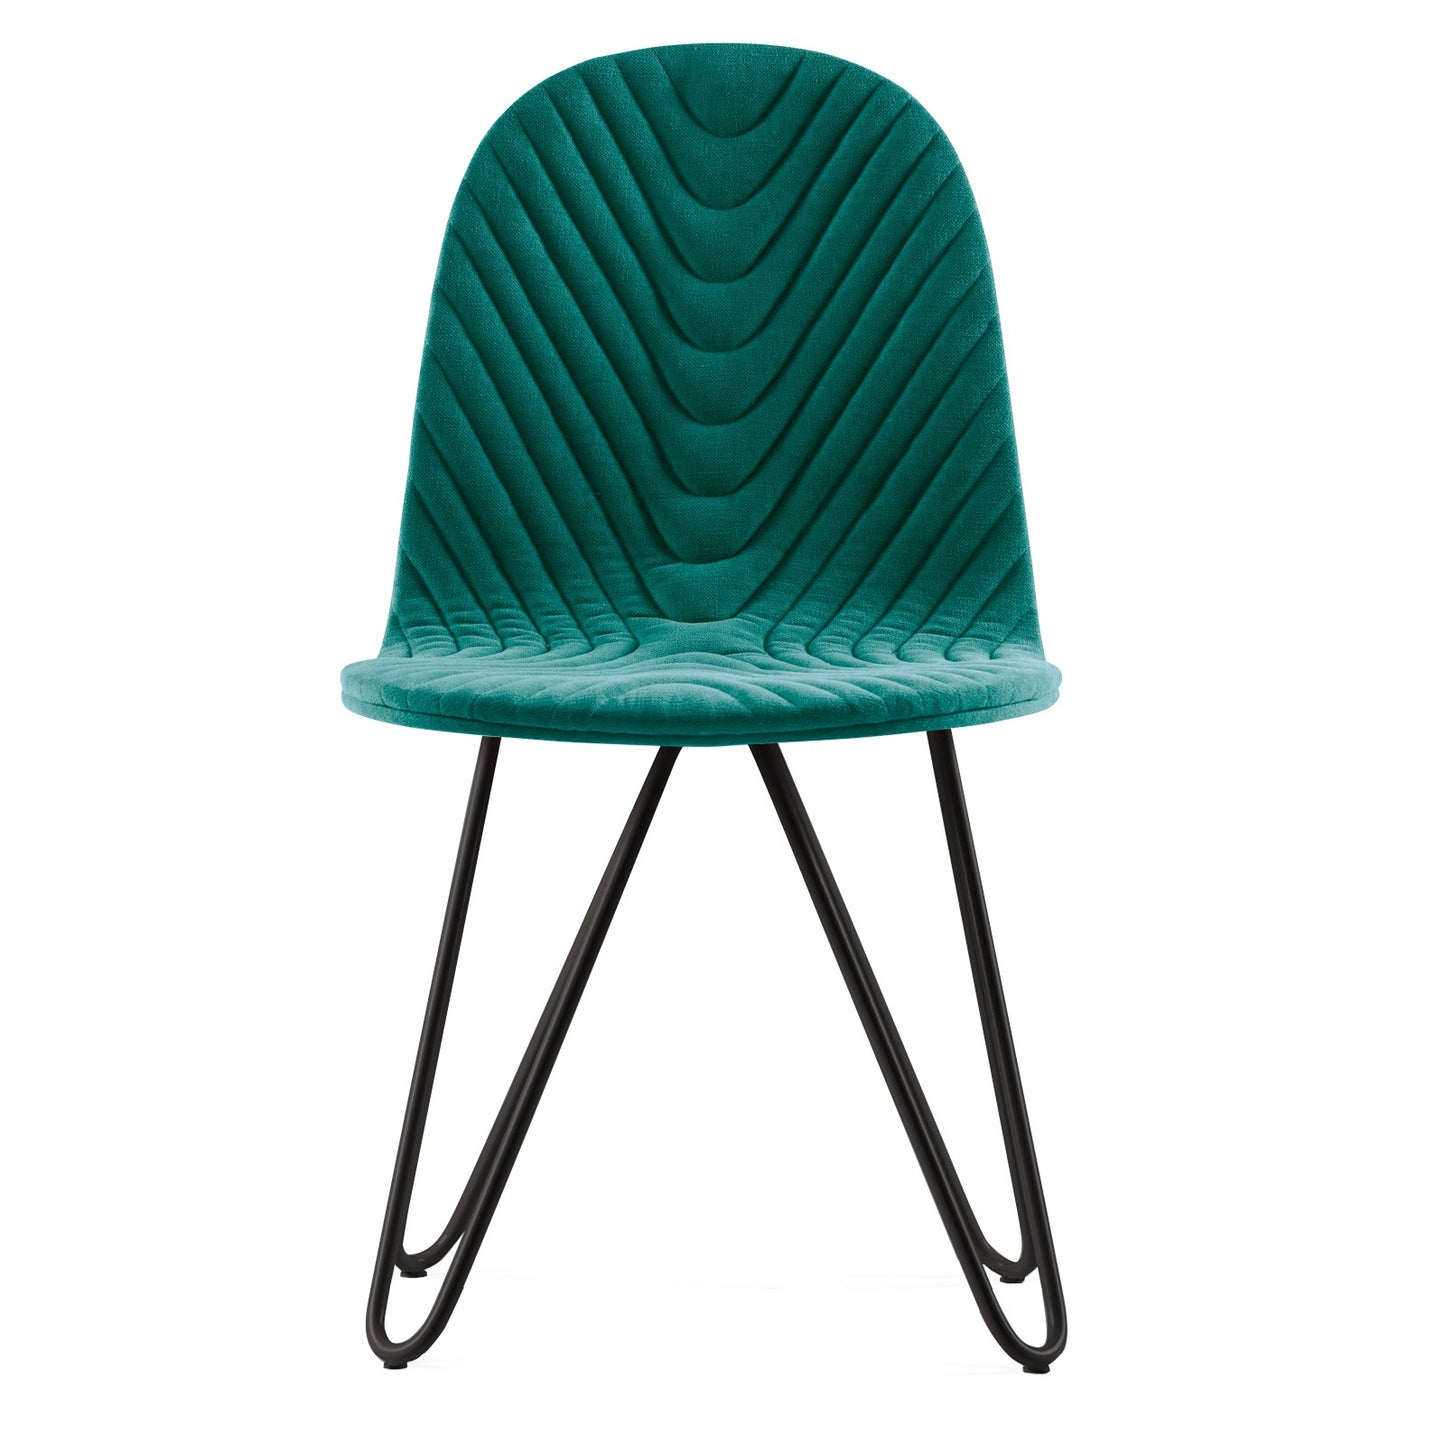 Chair Mannequin 03 - Turquoise